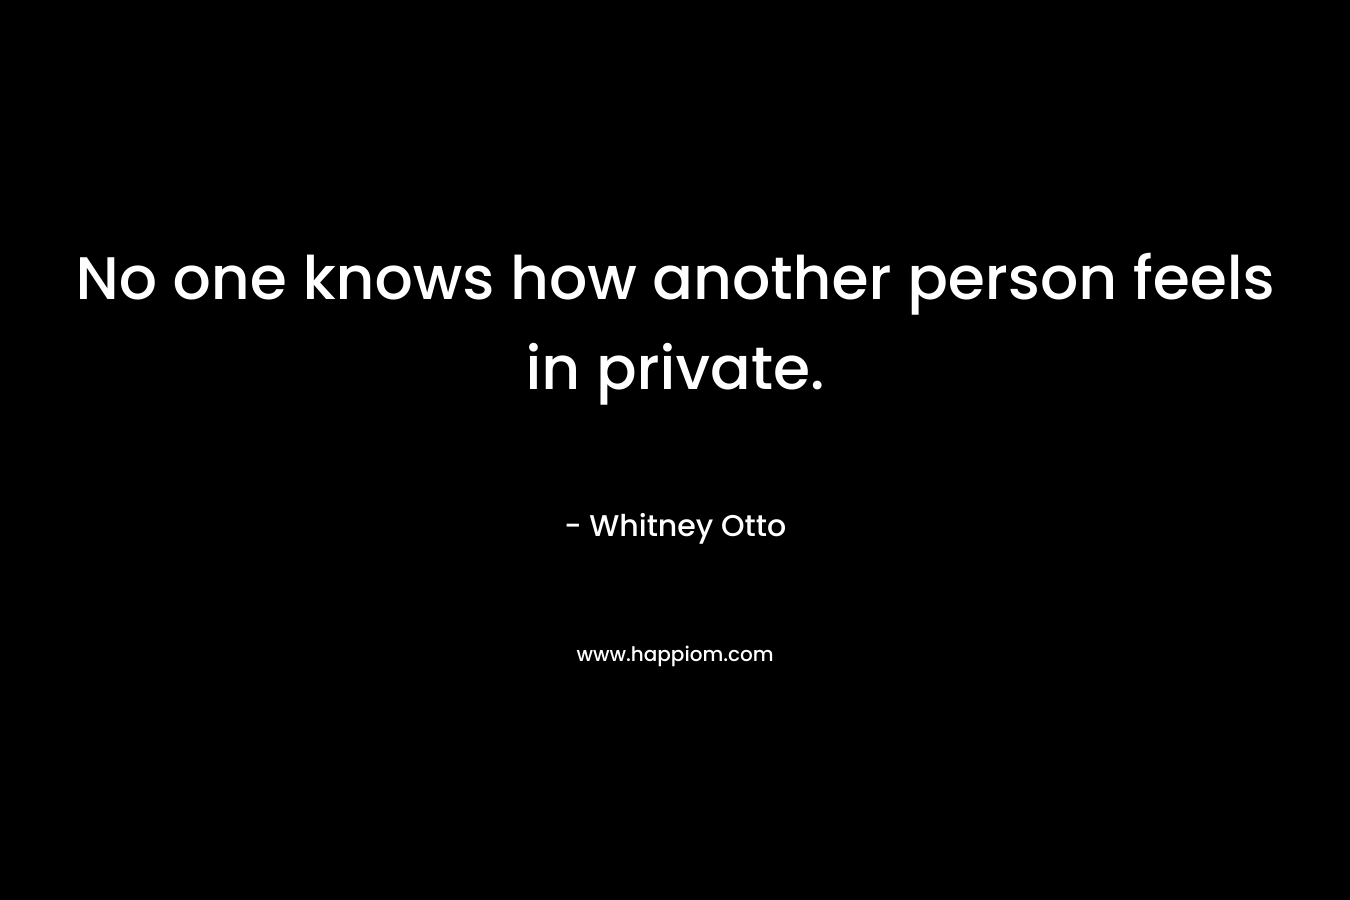 No one knows how another person feels in private.